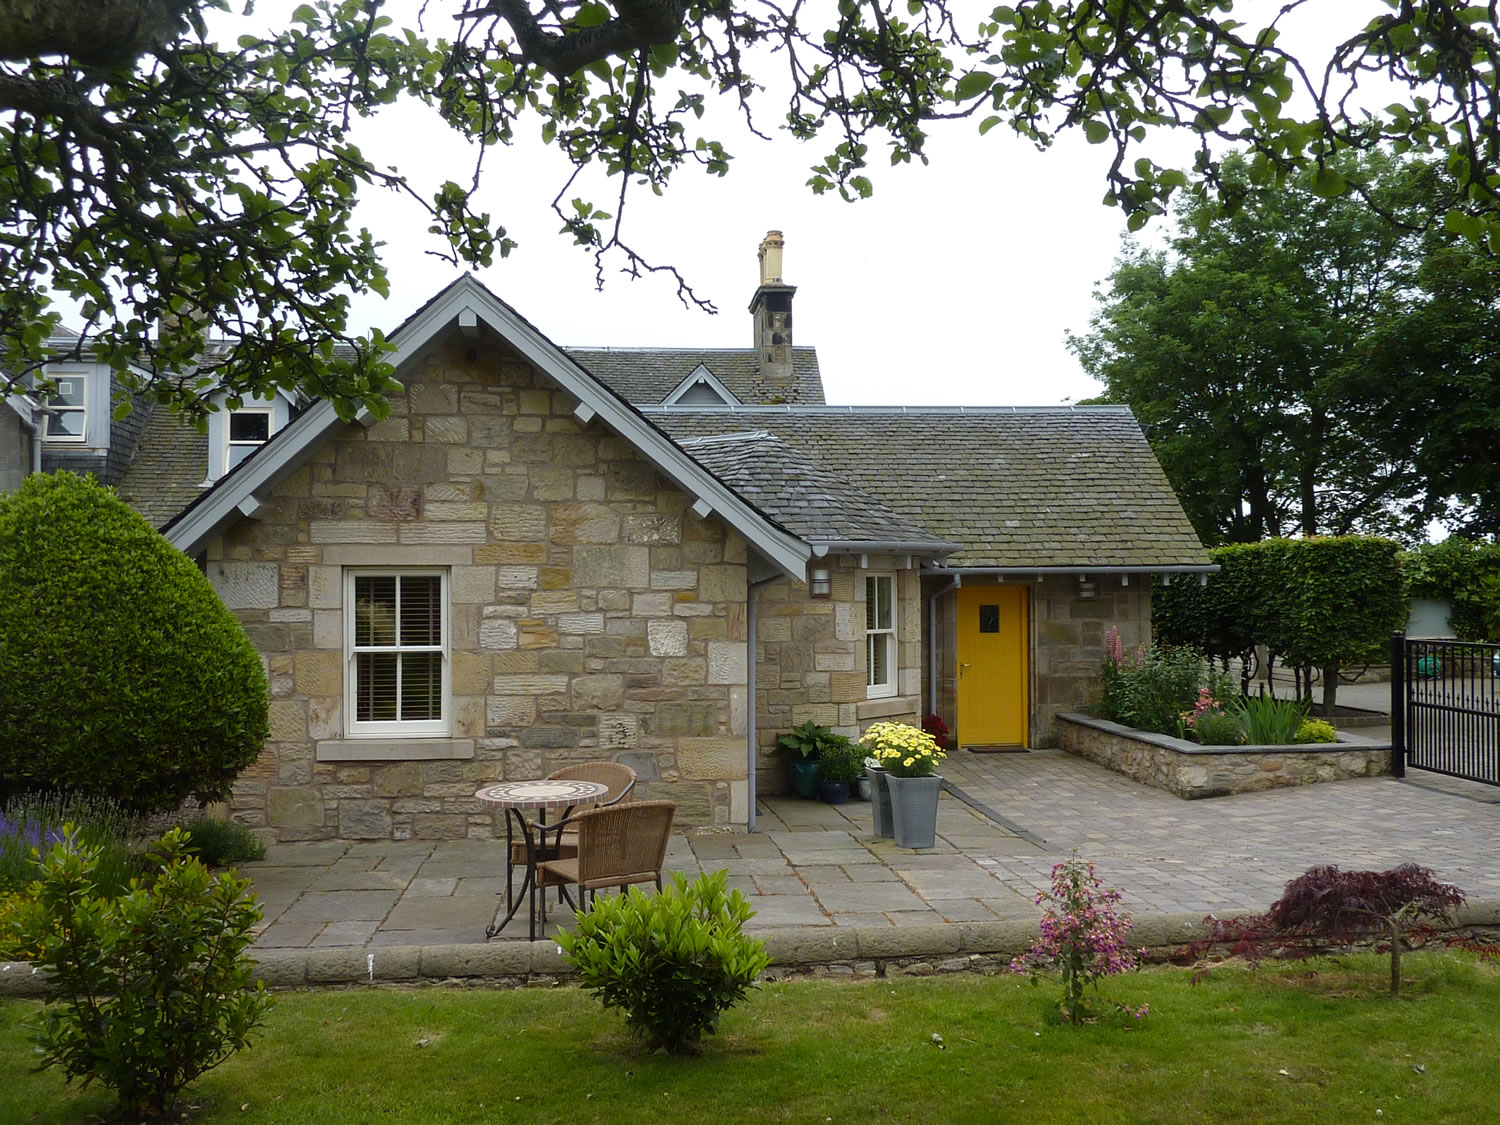 Self catering holiday let near st andrews